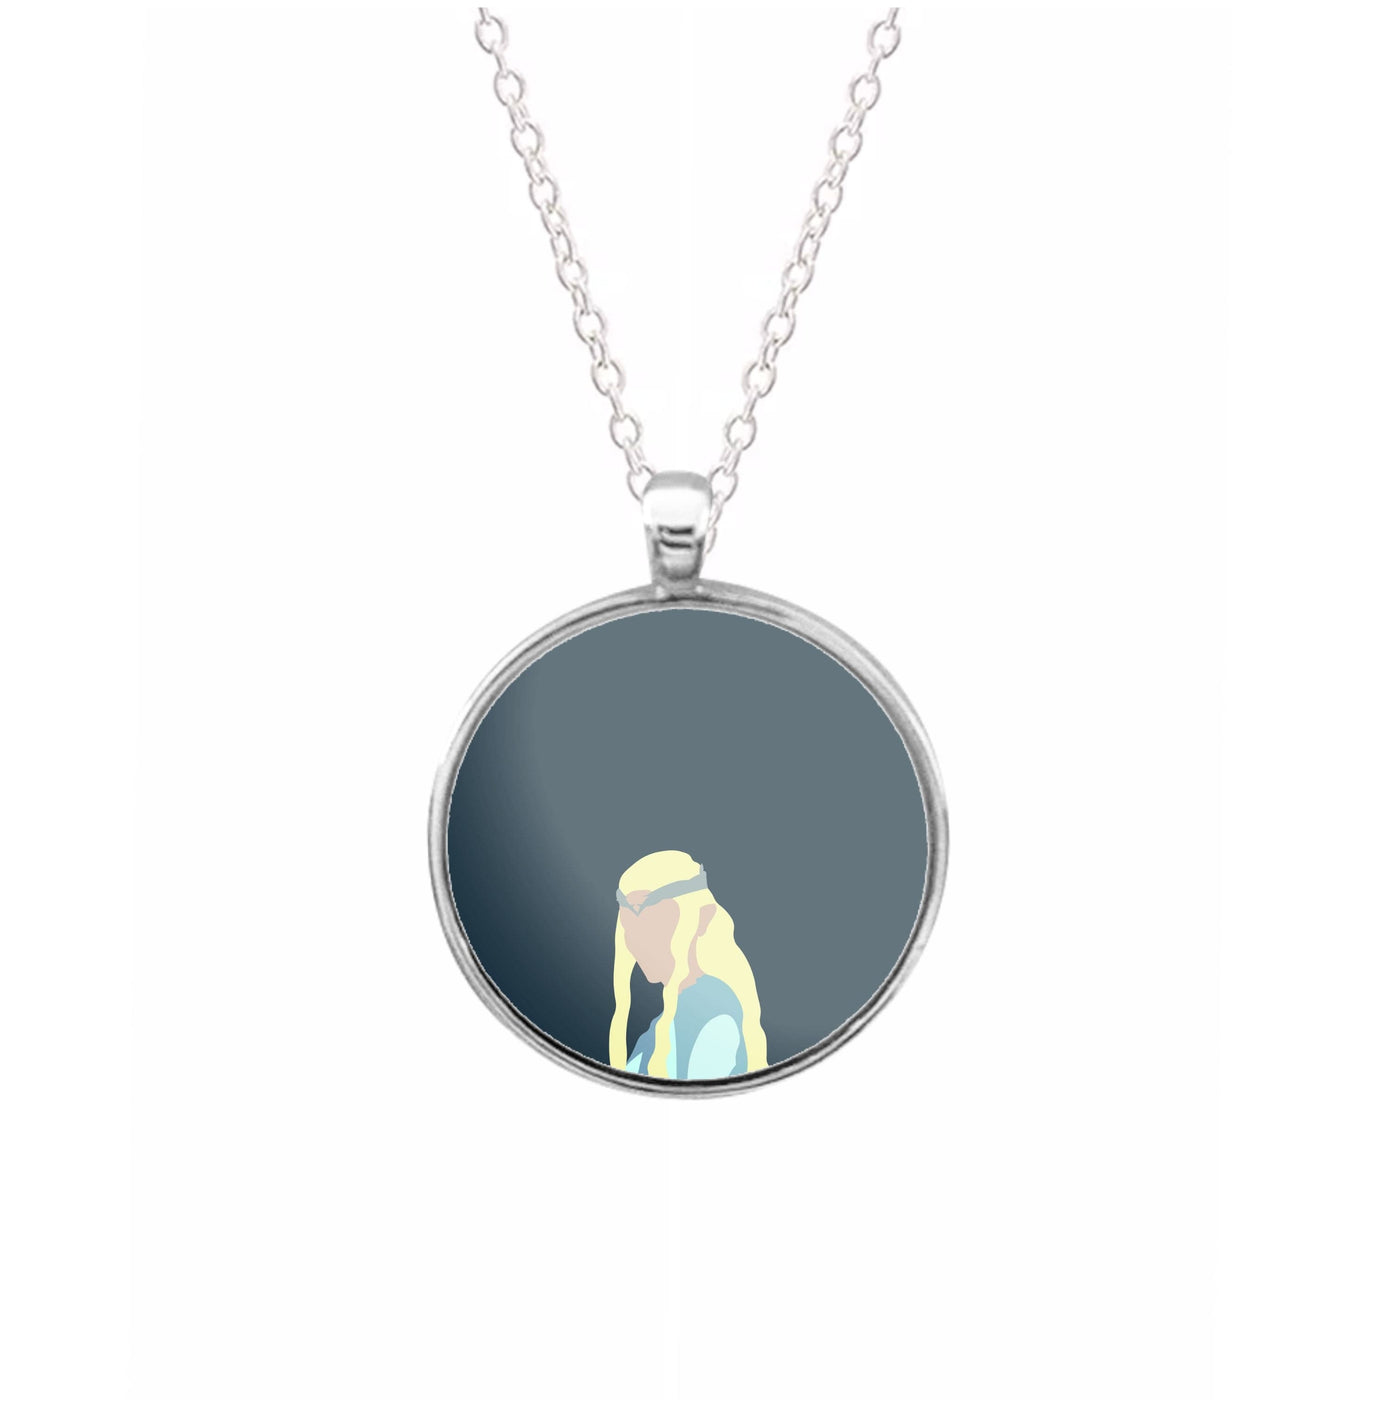 Galadriel - Lord Of The Rings Necklace